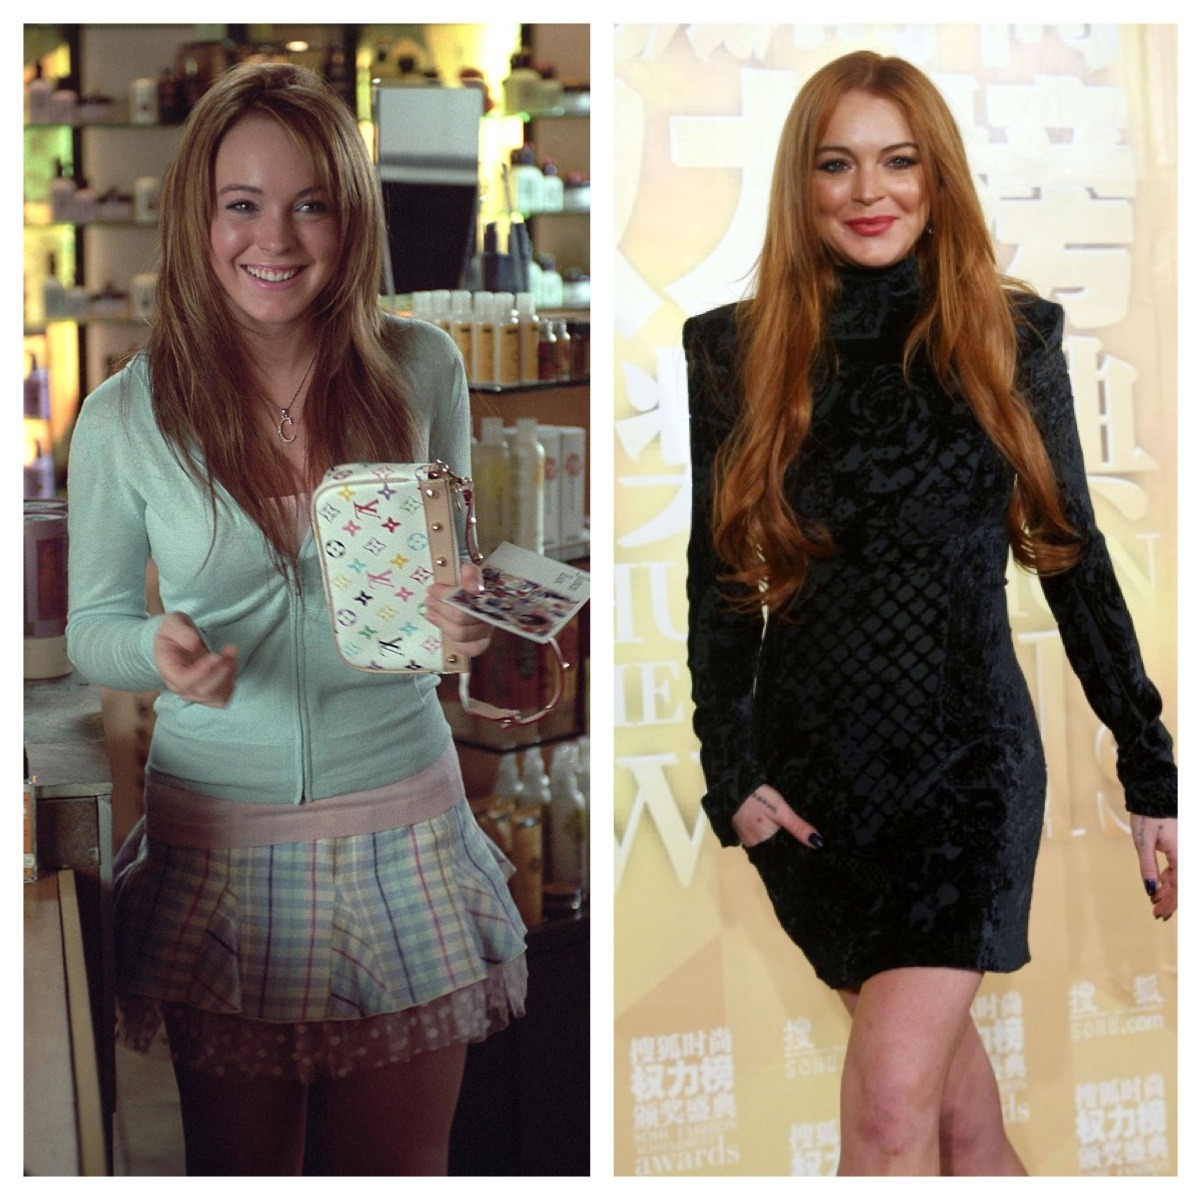 amusementforme:  Mean Girls cast: Then and Now   THIS IS SO IMPORTANT